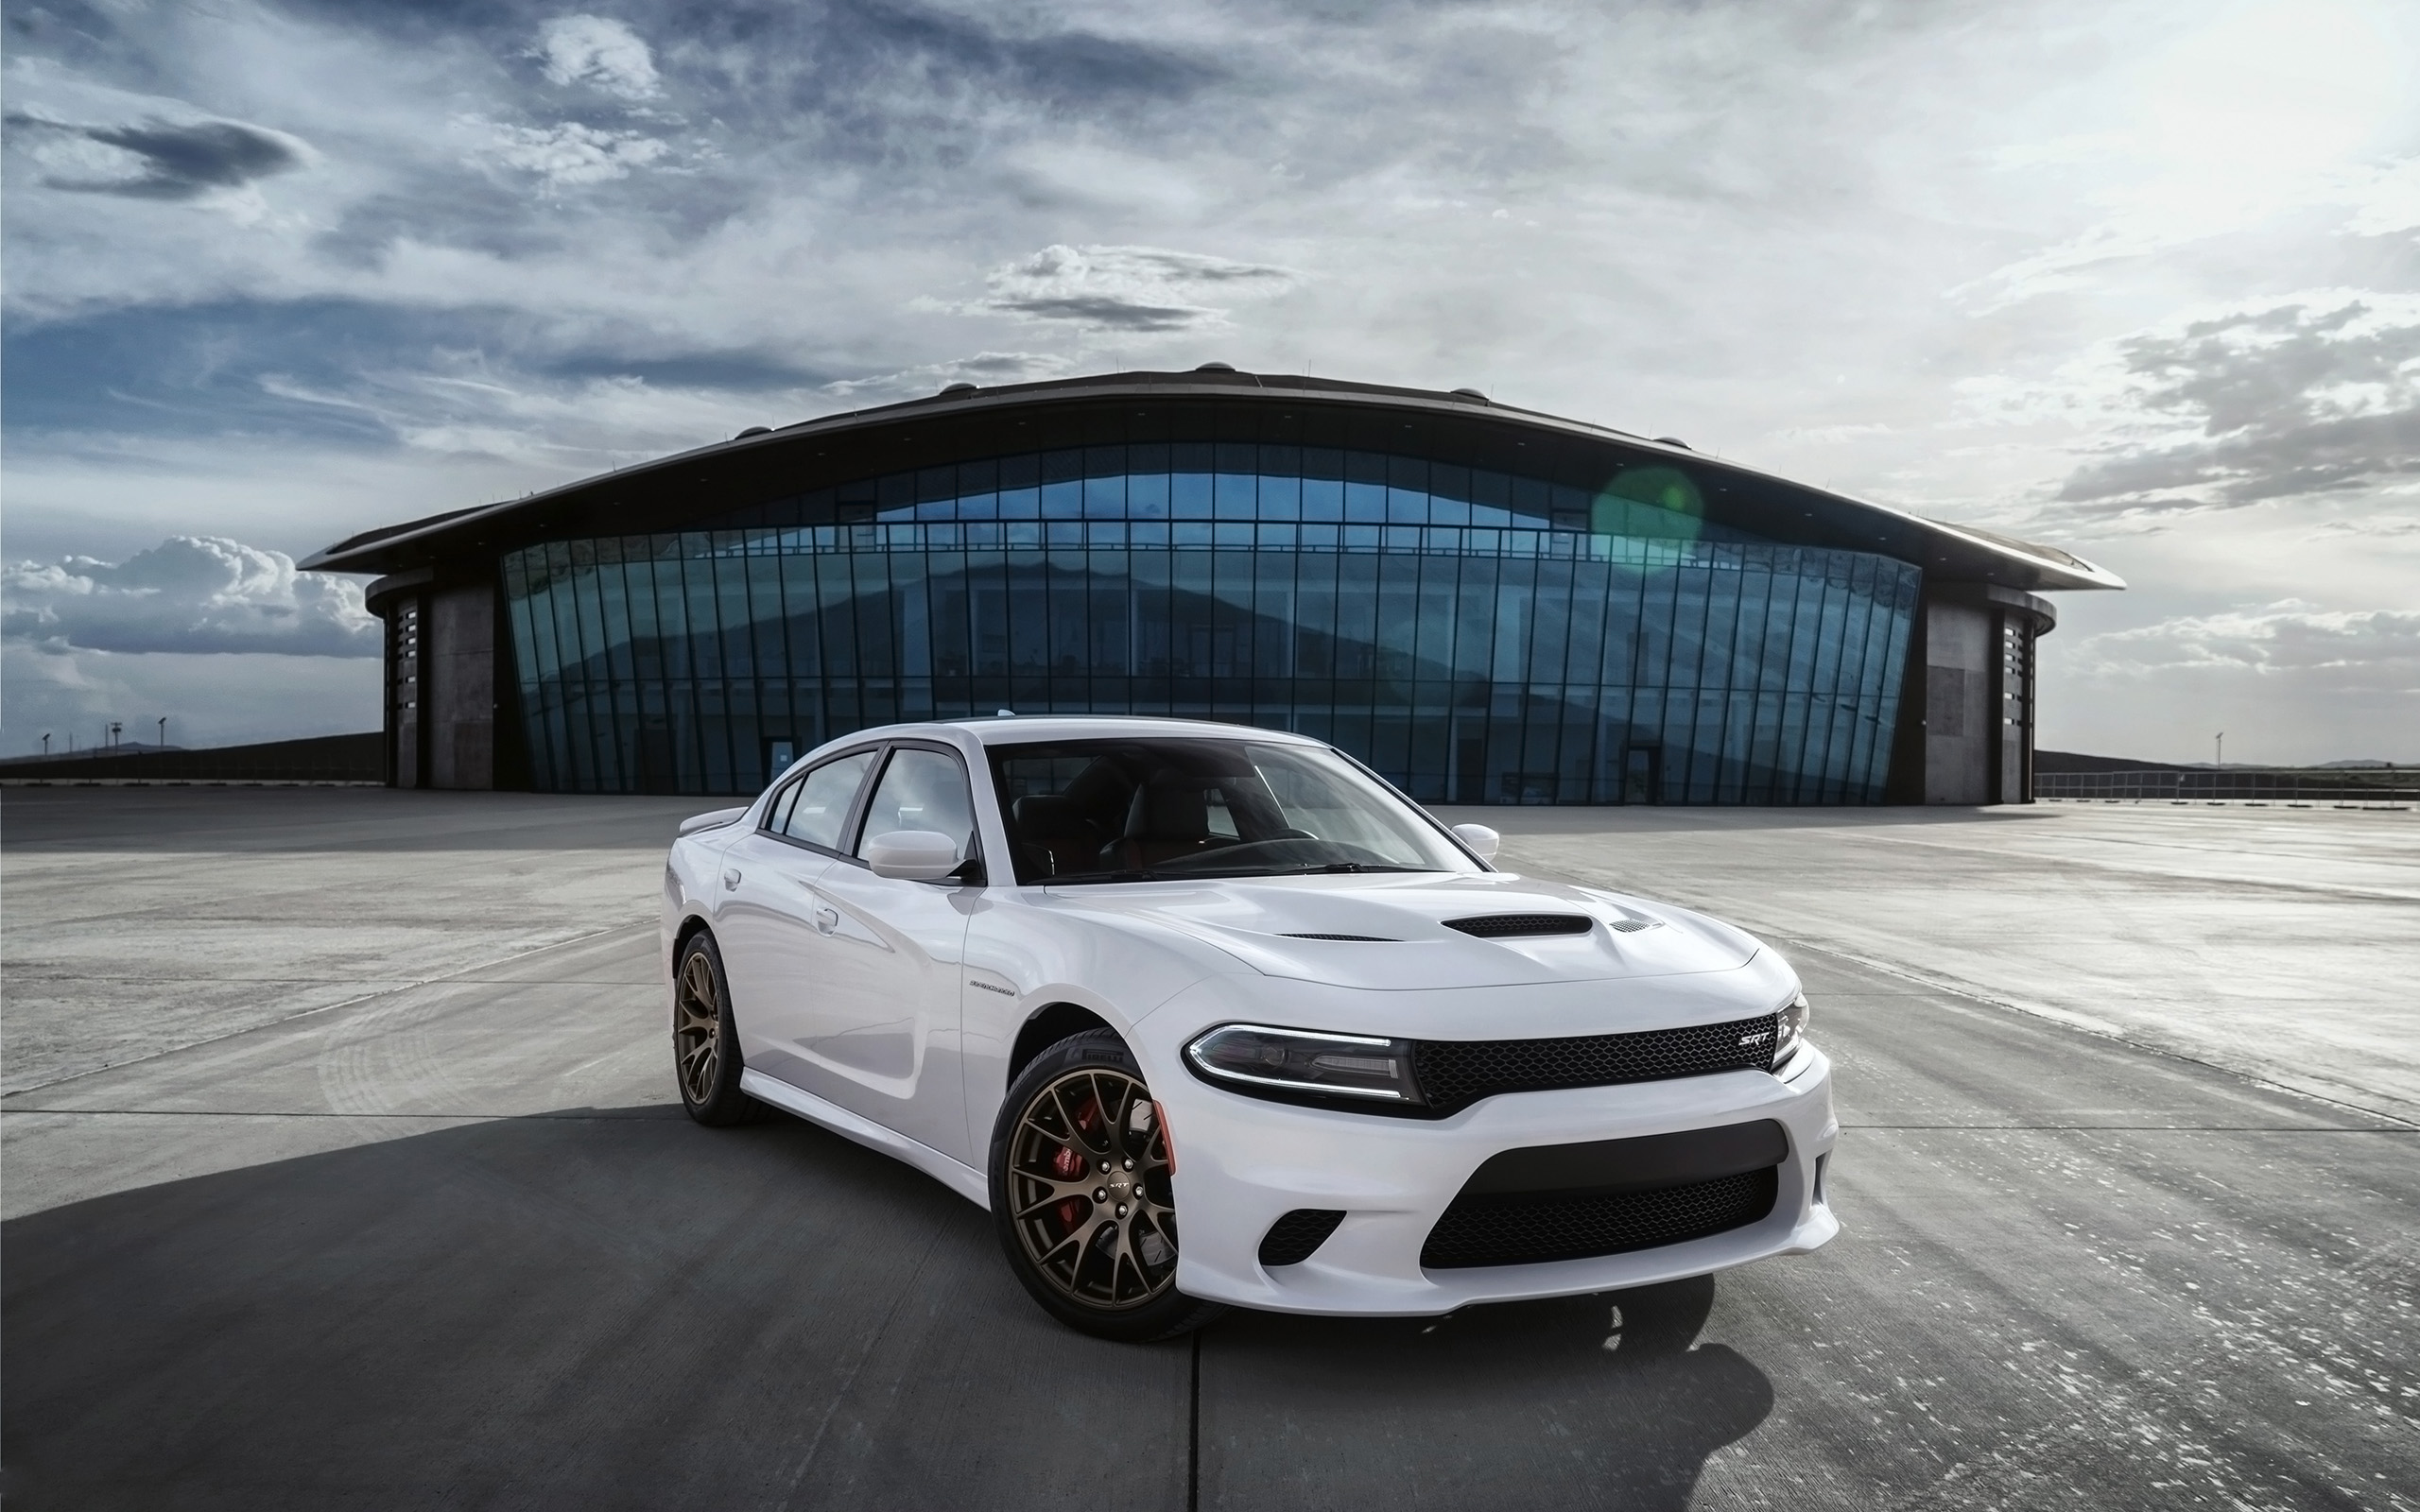 1360x768 Dodge Hellcat Forza Horizon 3 Laptop HD ,HD 4k  Wallpapers,Images,Backgrounds,Photos and Pictures